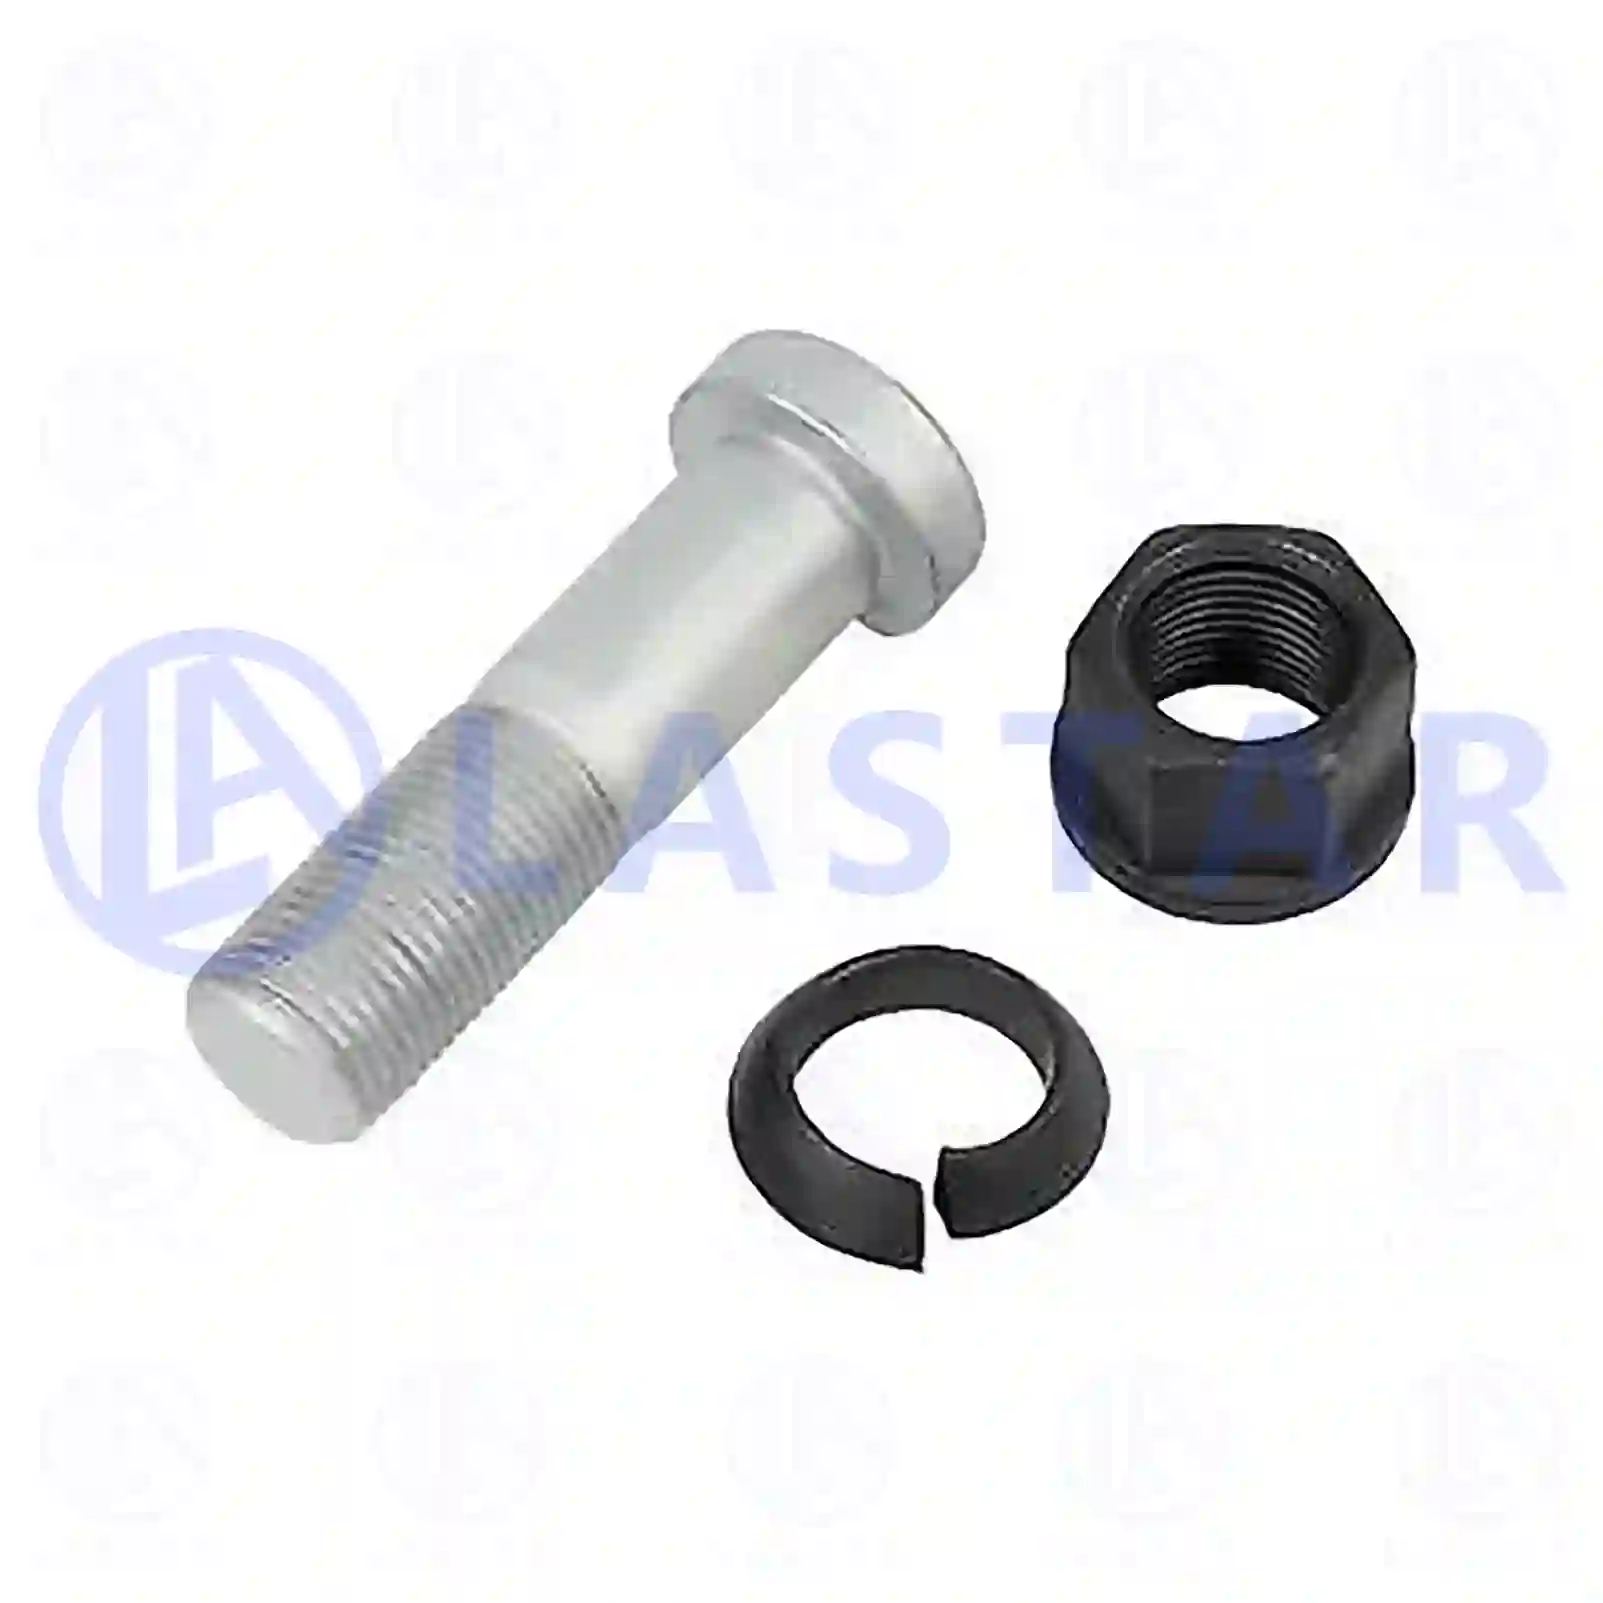 Wheel bolt, complete, 77726447, 3184020071S2, , , , ||  77726447 Lastar Spare Part | Truck Spare Parts, Auotomotive Spare Parts Wheel bolt, complete, 77726447, 3184020071S2, , , , ||  77726447 Lastar Spare Part | Truck Spare Parts, Auotomotive Spare Parts